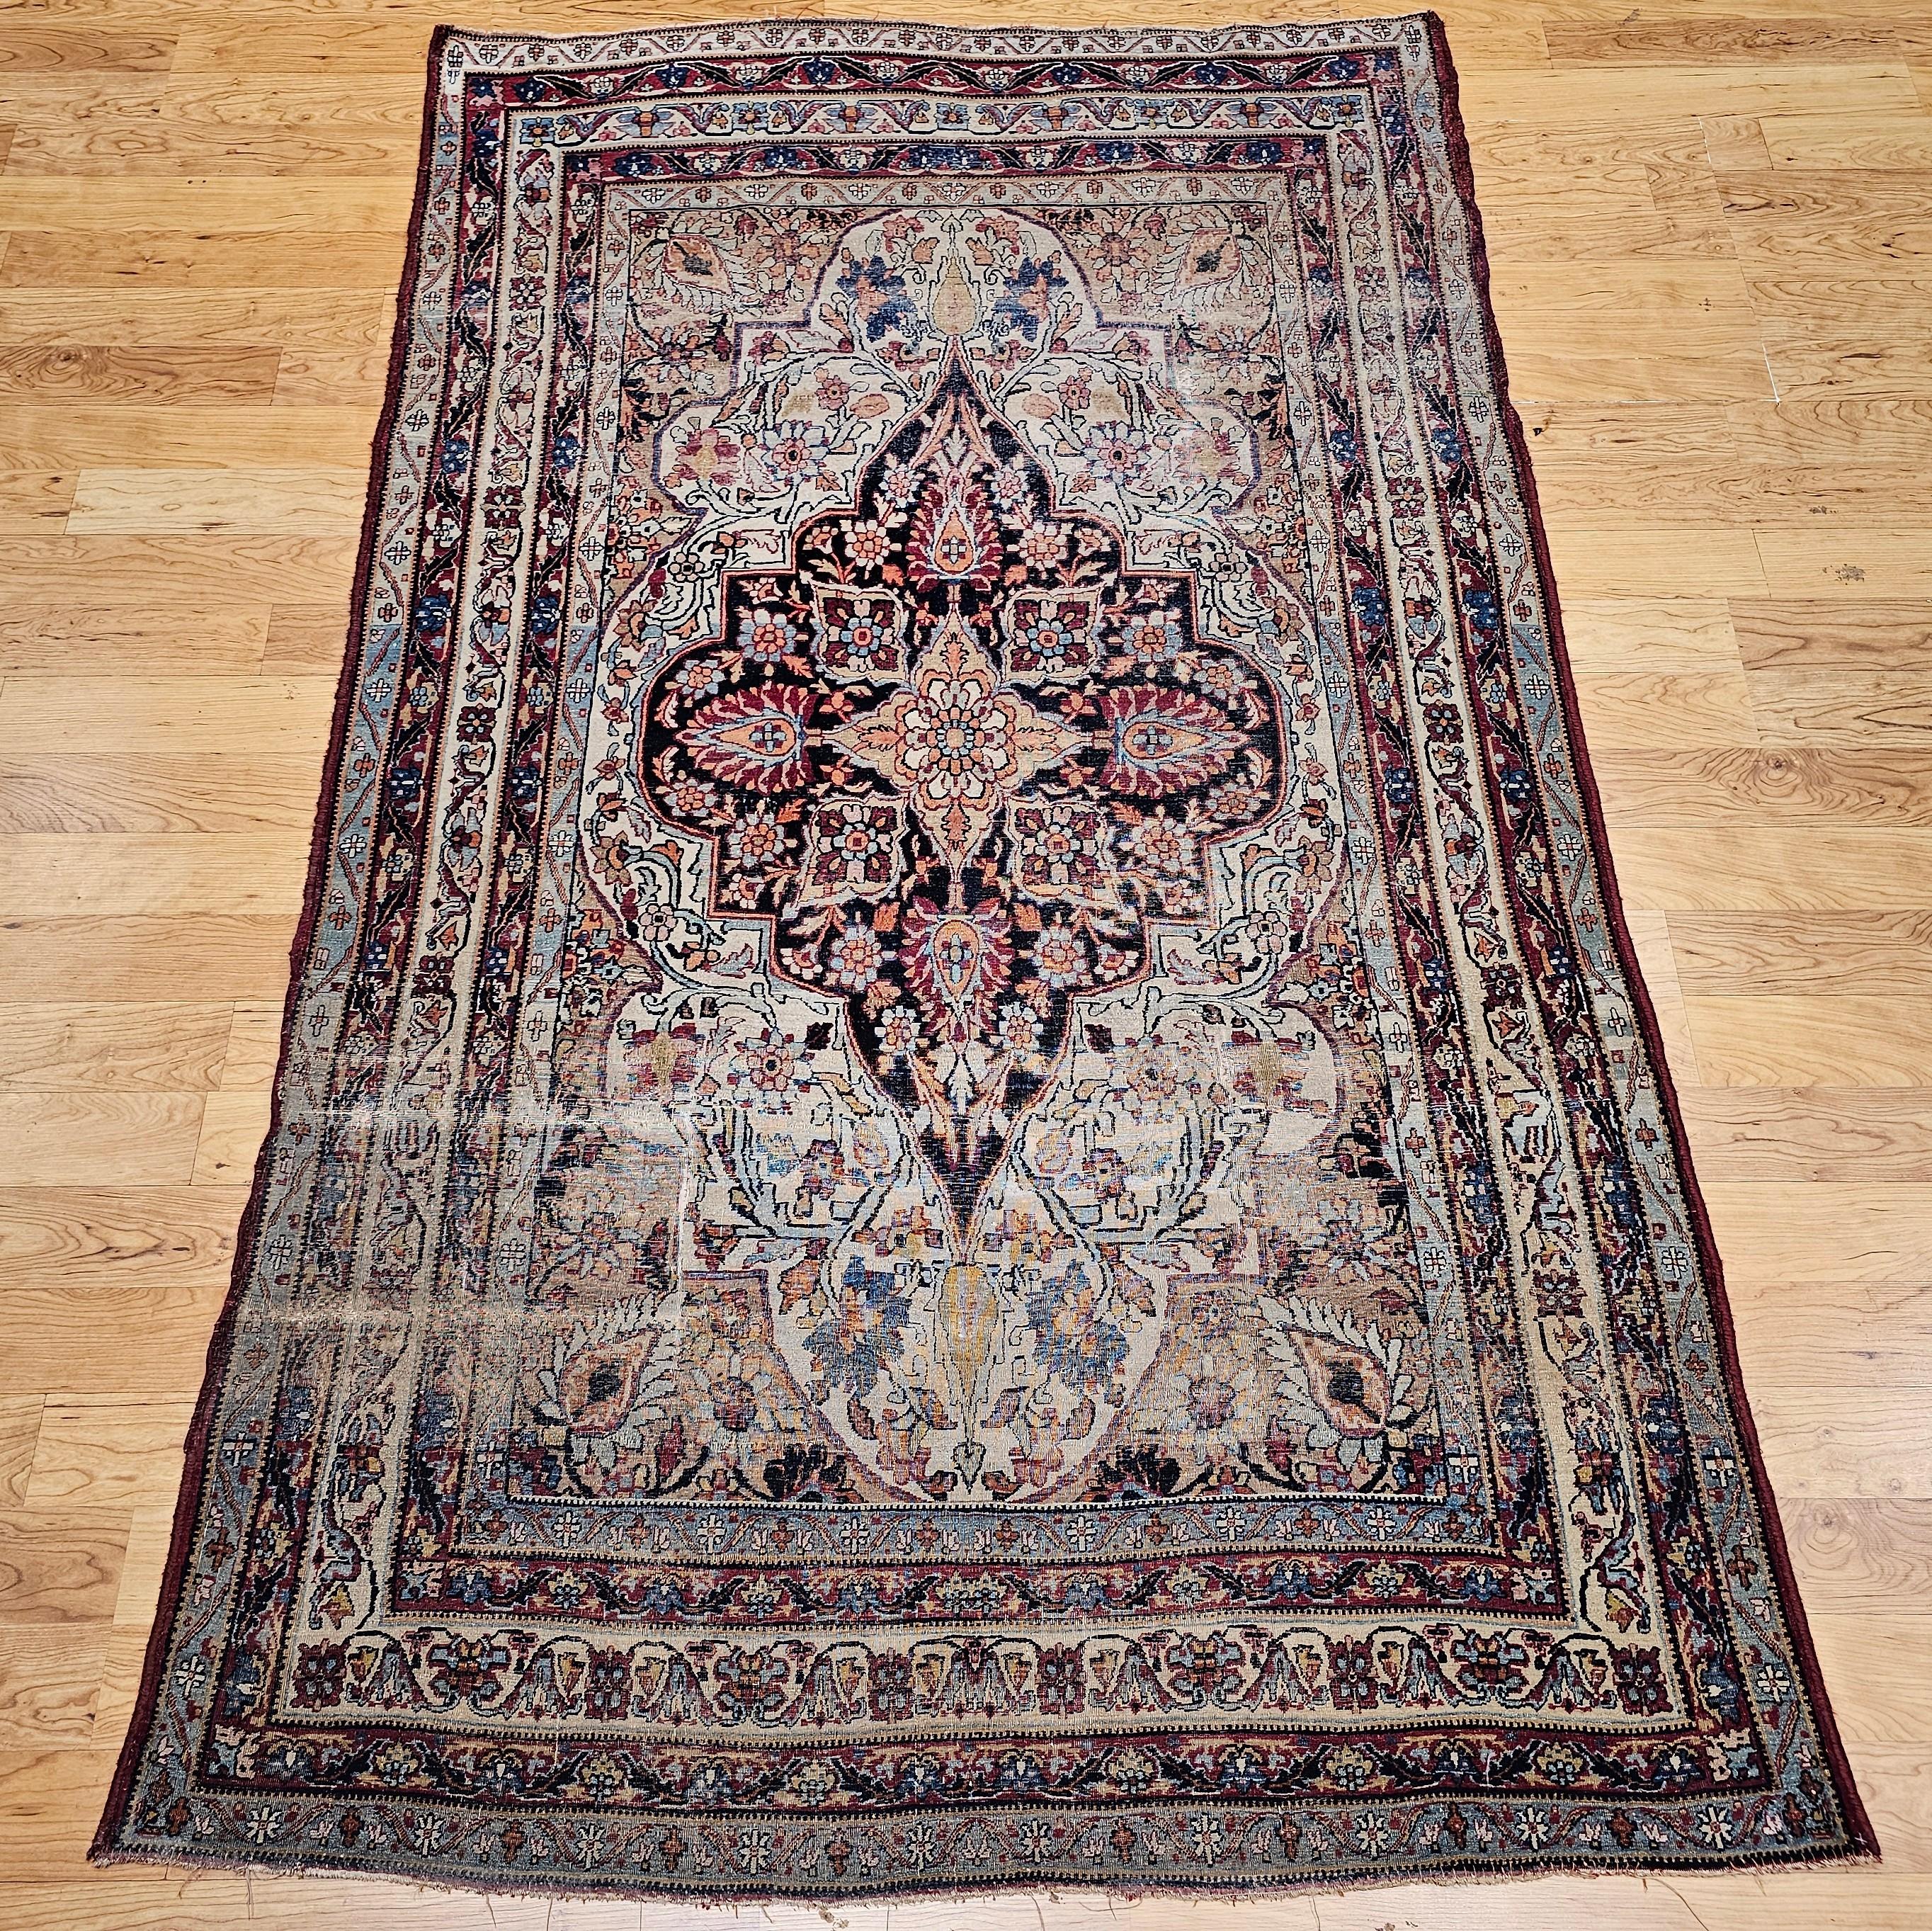 Truly a masterpiece of design and colors!  Beautiful Kerman Lavar rug with a central medallion with a large format floral design from the late 1800s. The main field is in an ivory color with a central medallion in navy blue. The rug has accent